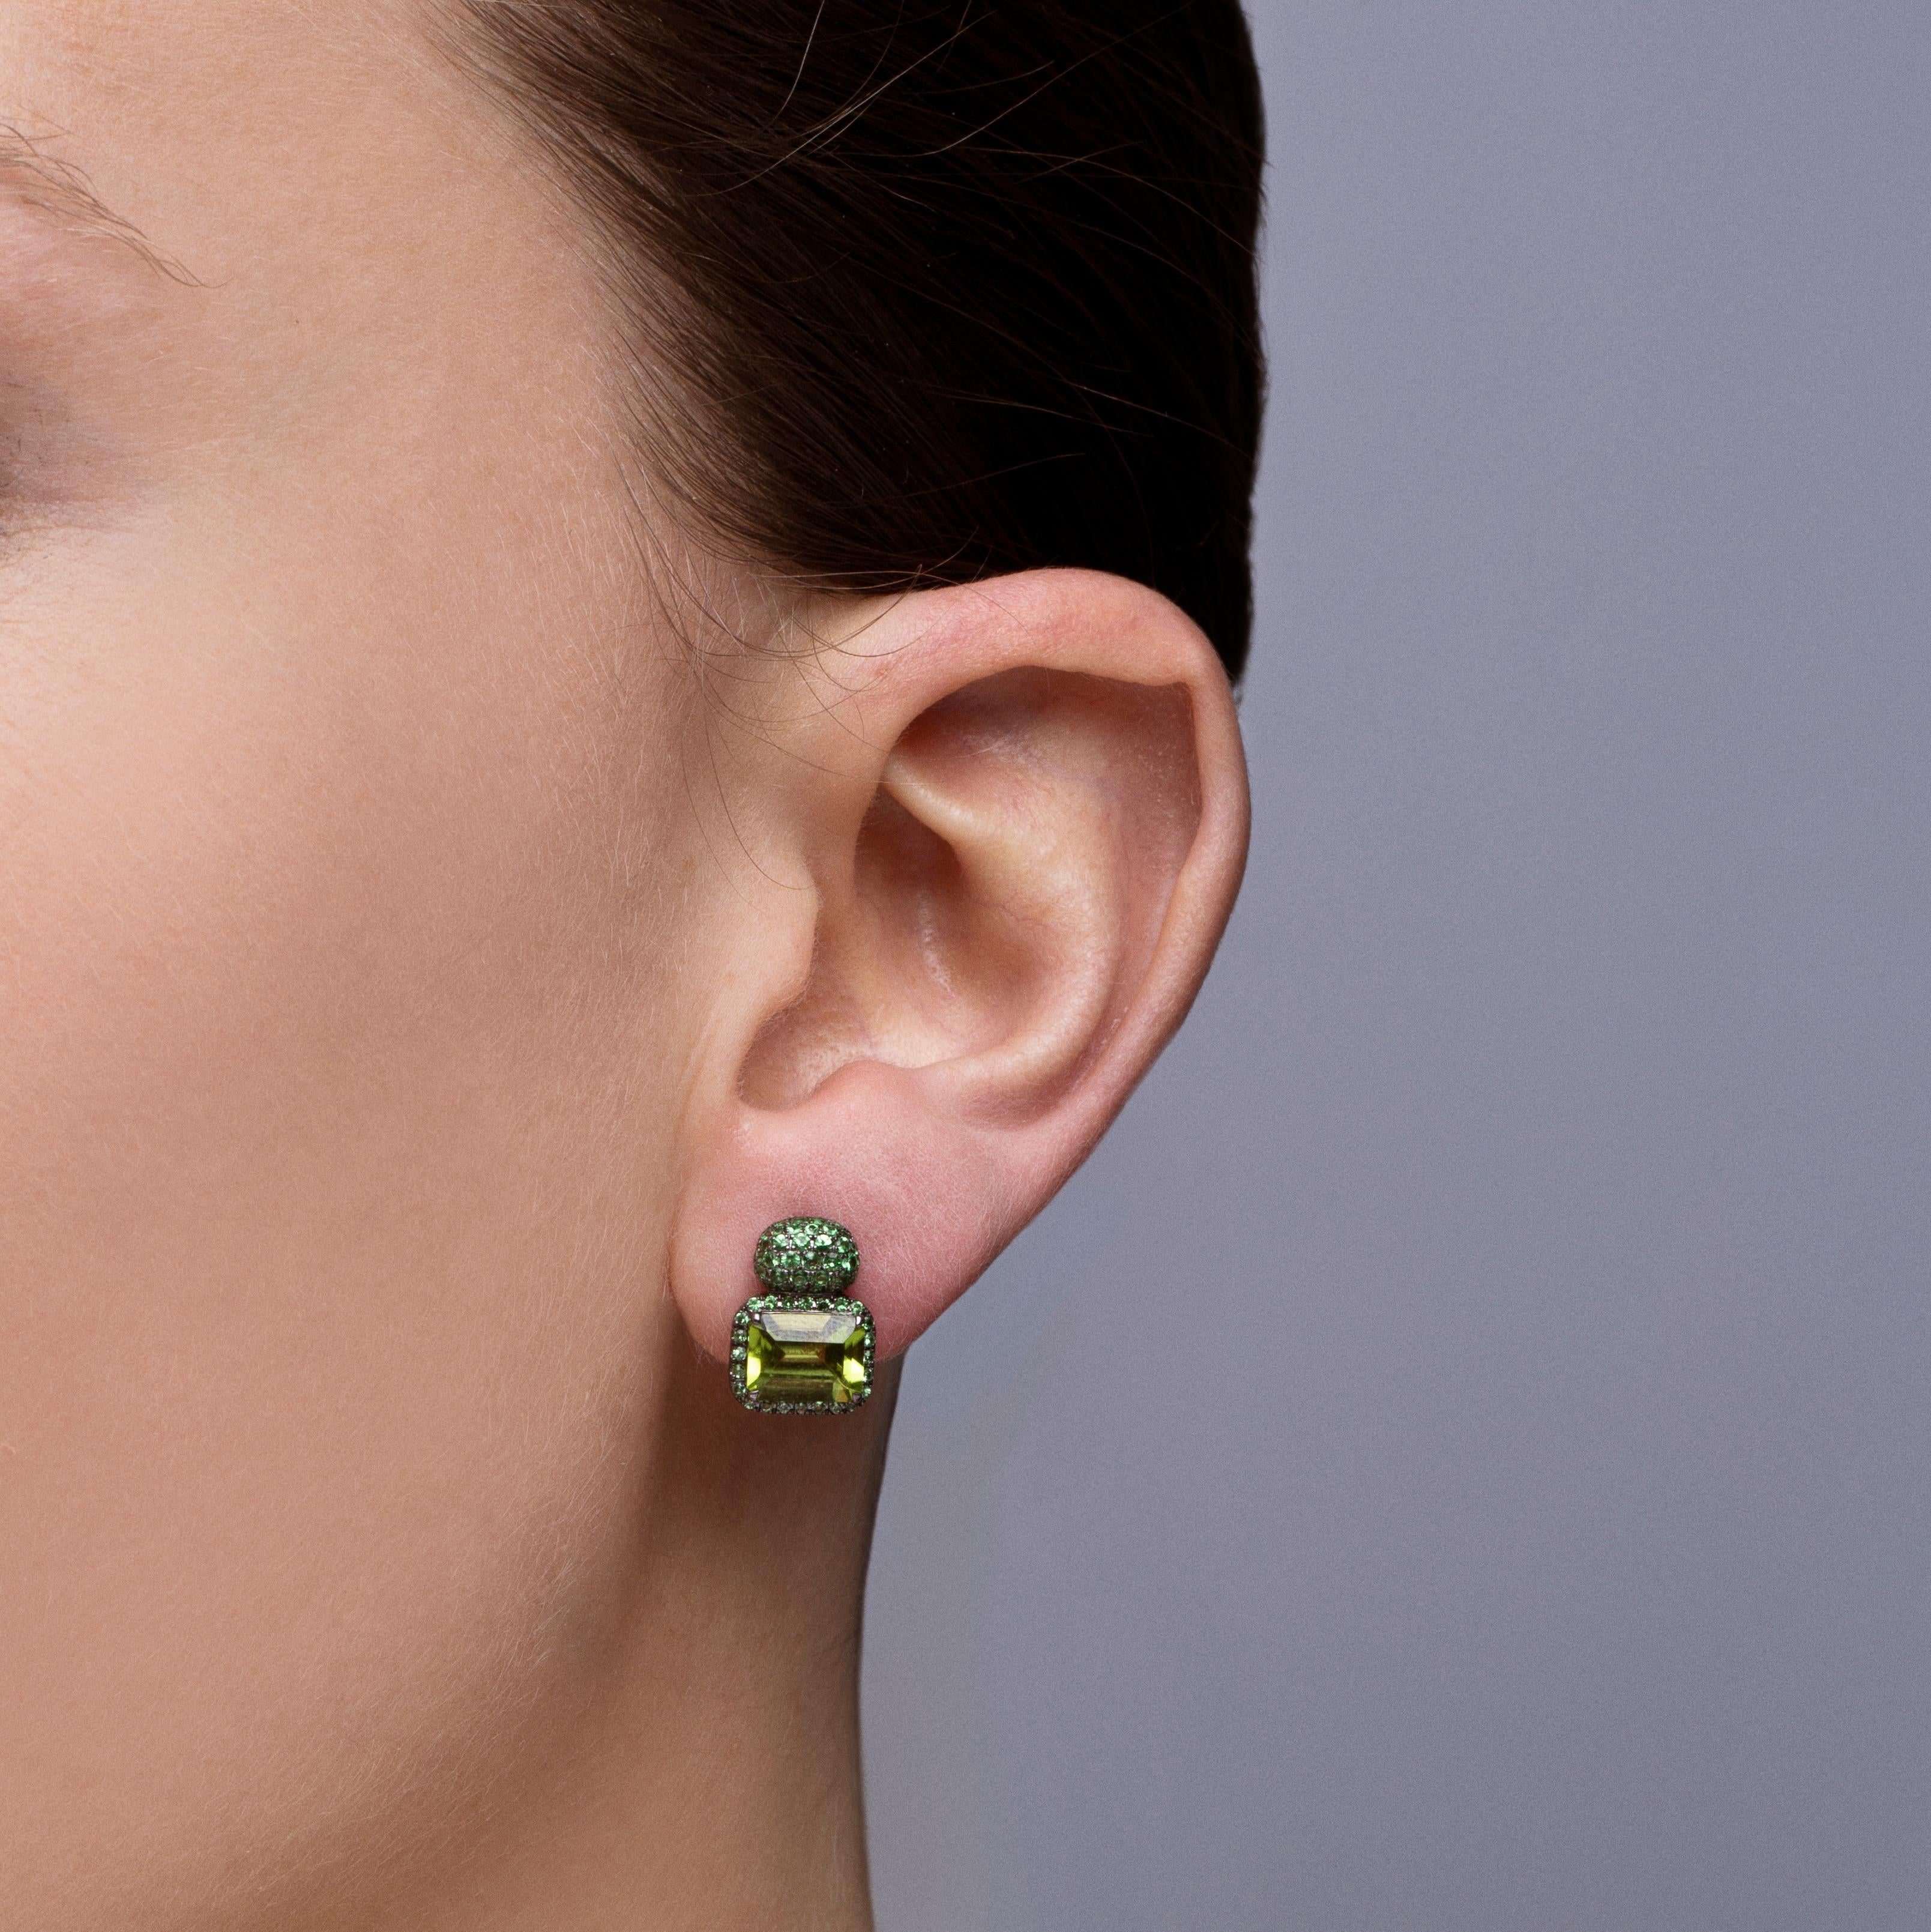 Alex Jona design collection, hand crafted in Italy, 18 karat white gold with black rhodium stud earrings set with two emerald cut peridots weighing 3.35 carats in total, surrounded by 0,79 carats of round cut  tsavorite.
Dimensions: H